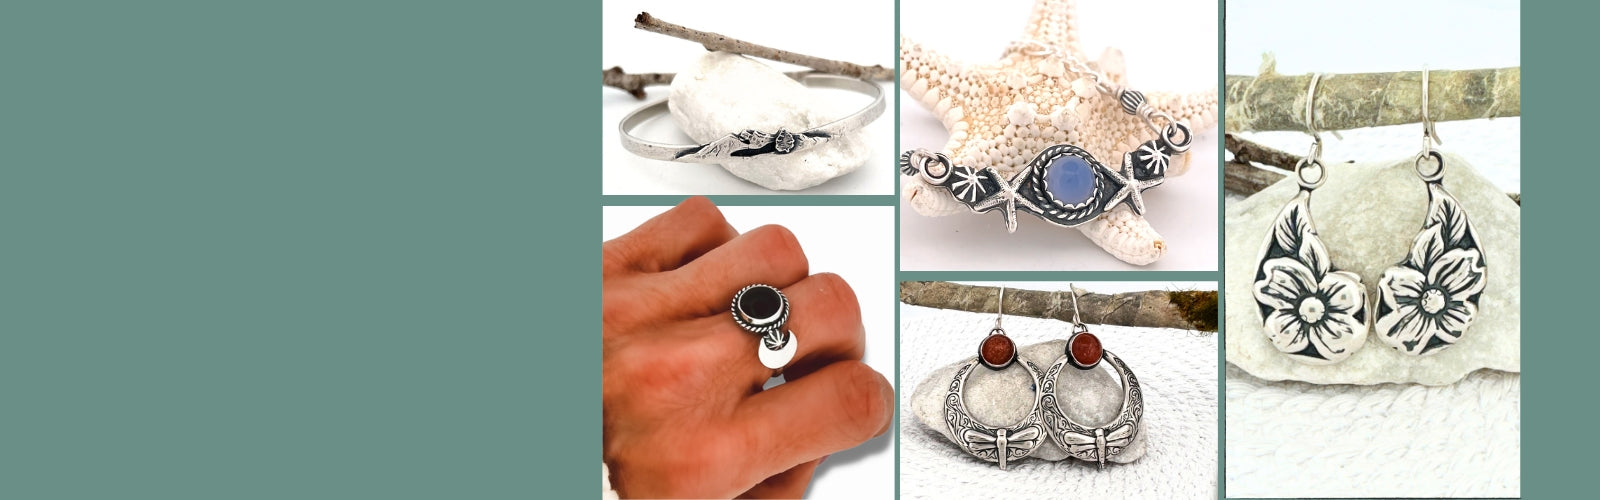 silver and gemstone earrings, necklace and ring and braceletr